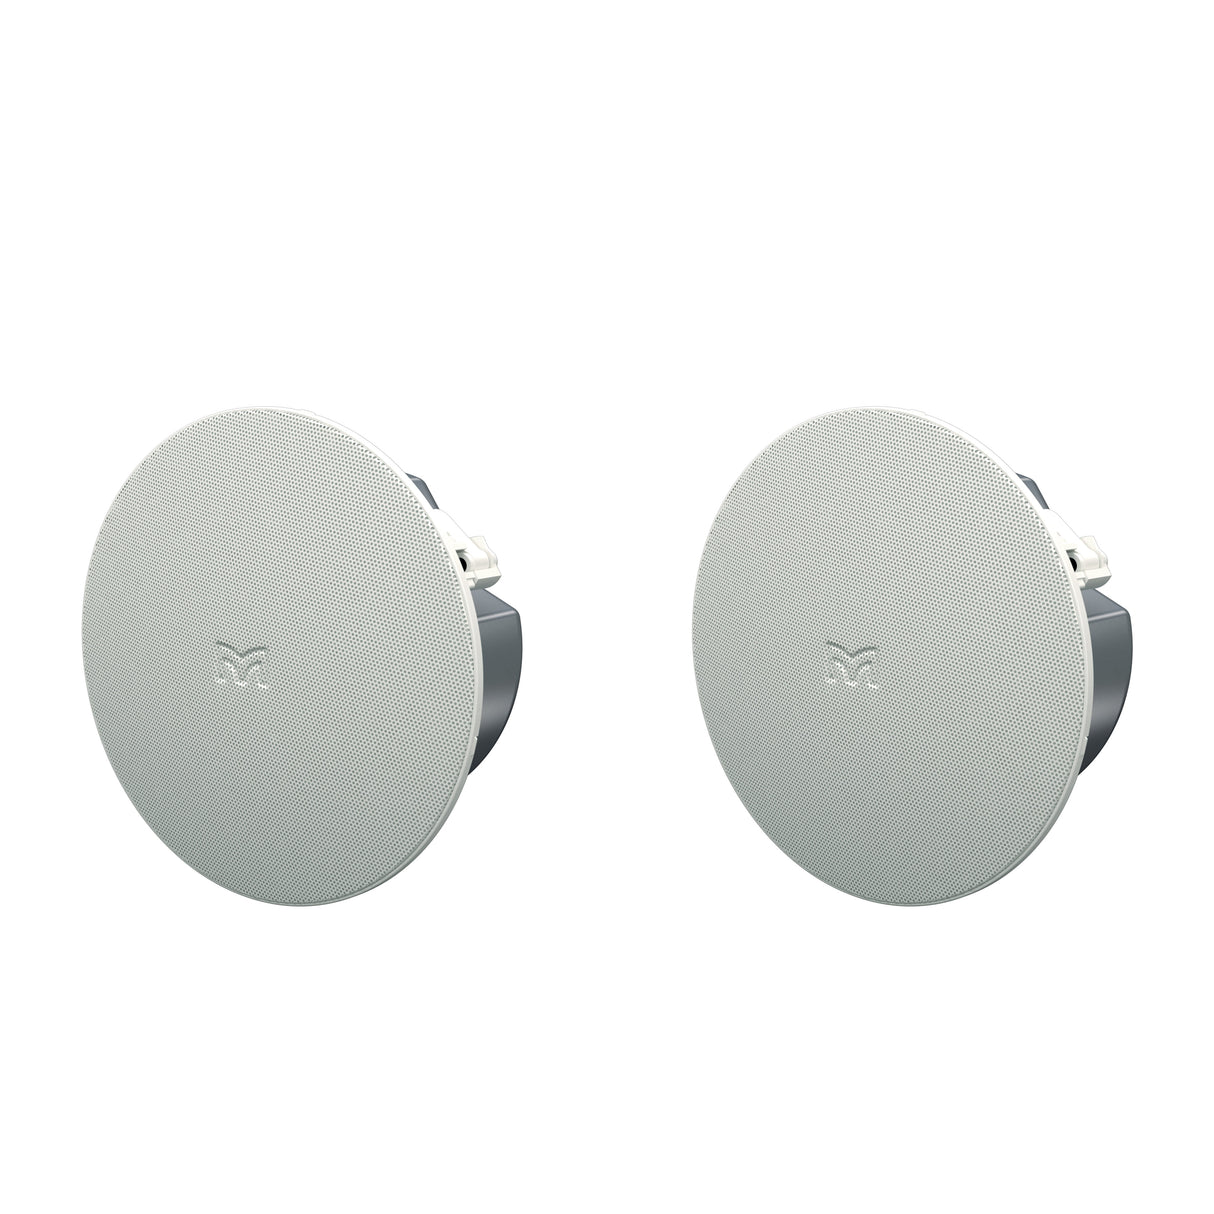 Martin Audio ACS-40TS-W 4-Inch Passive Two-Way Ceiling Speaker, White, Pair